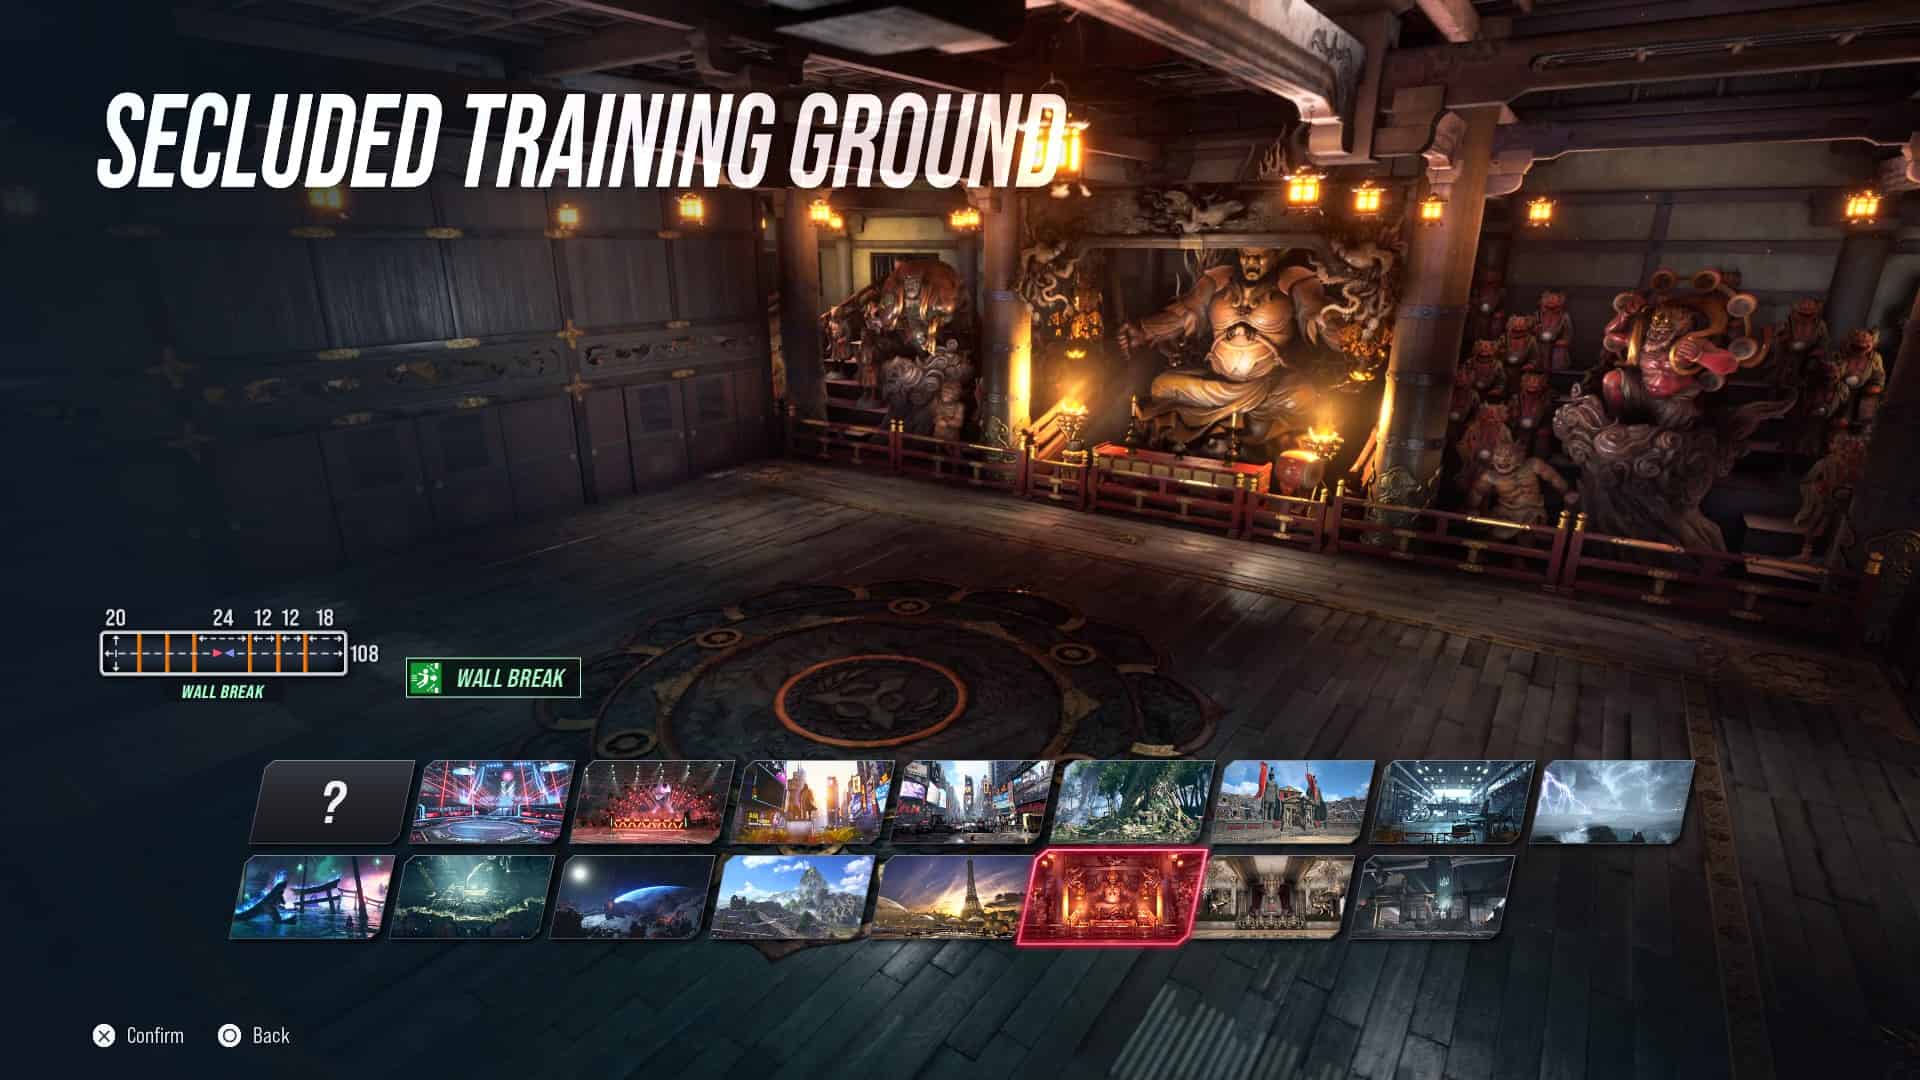 Tekken 8 stages: The Secluded Training Ground stage in the stage select screen